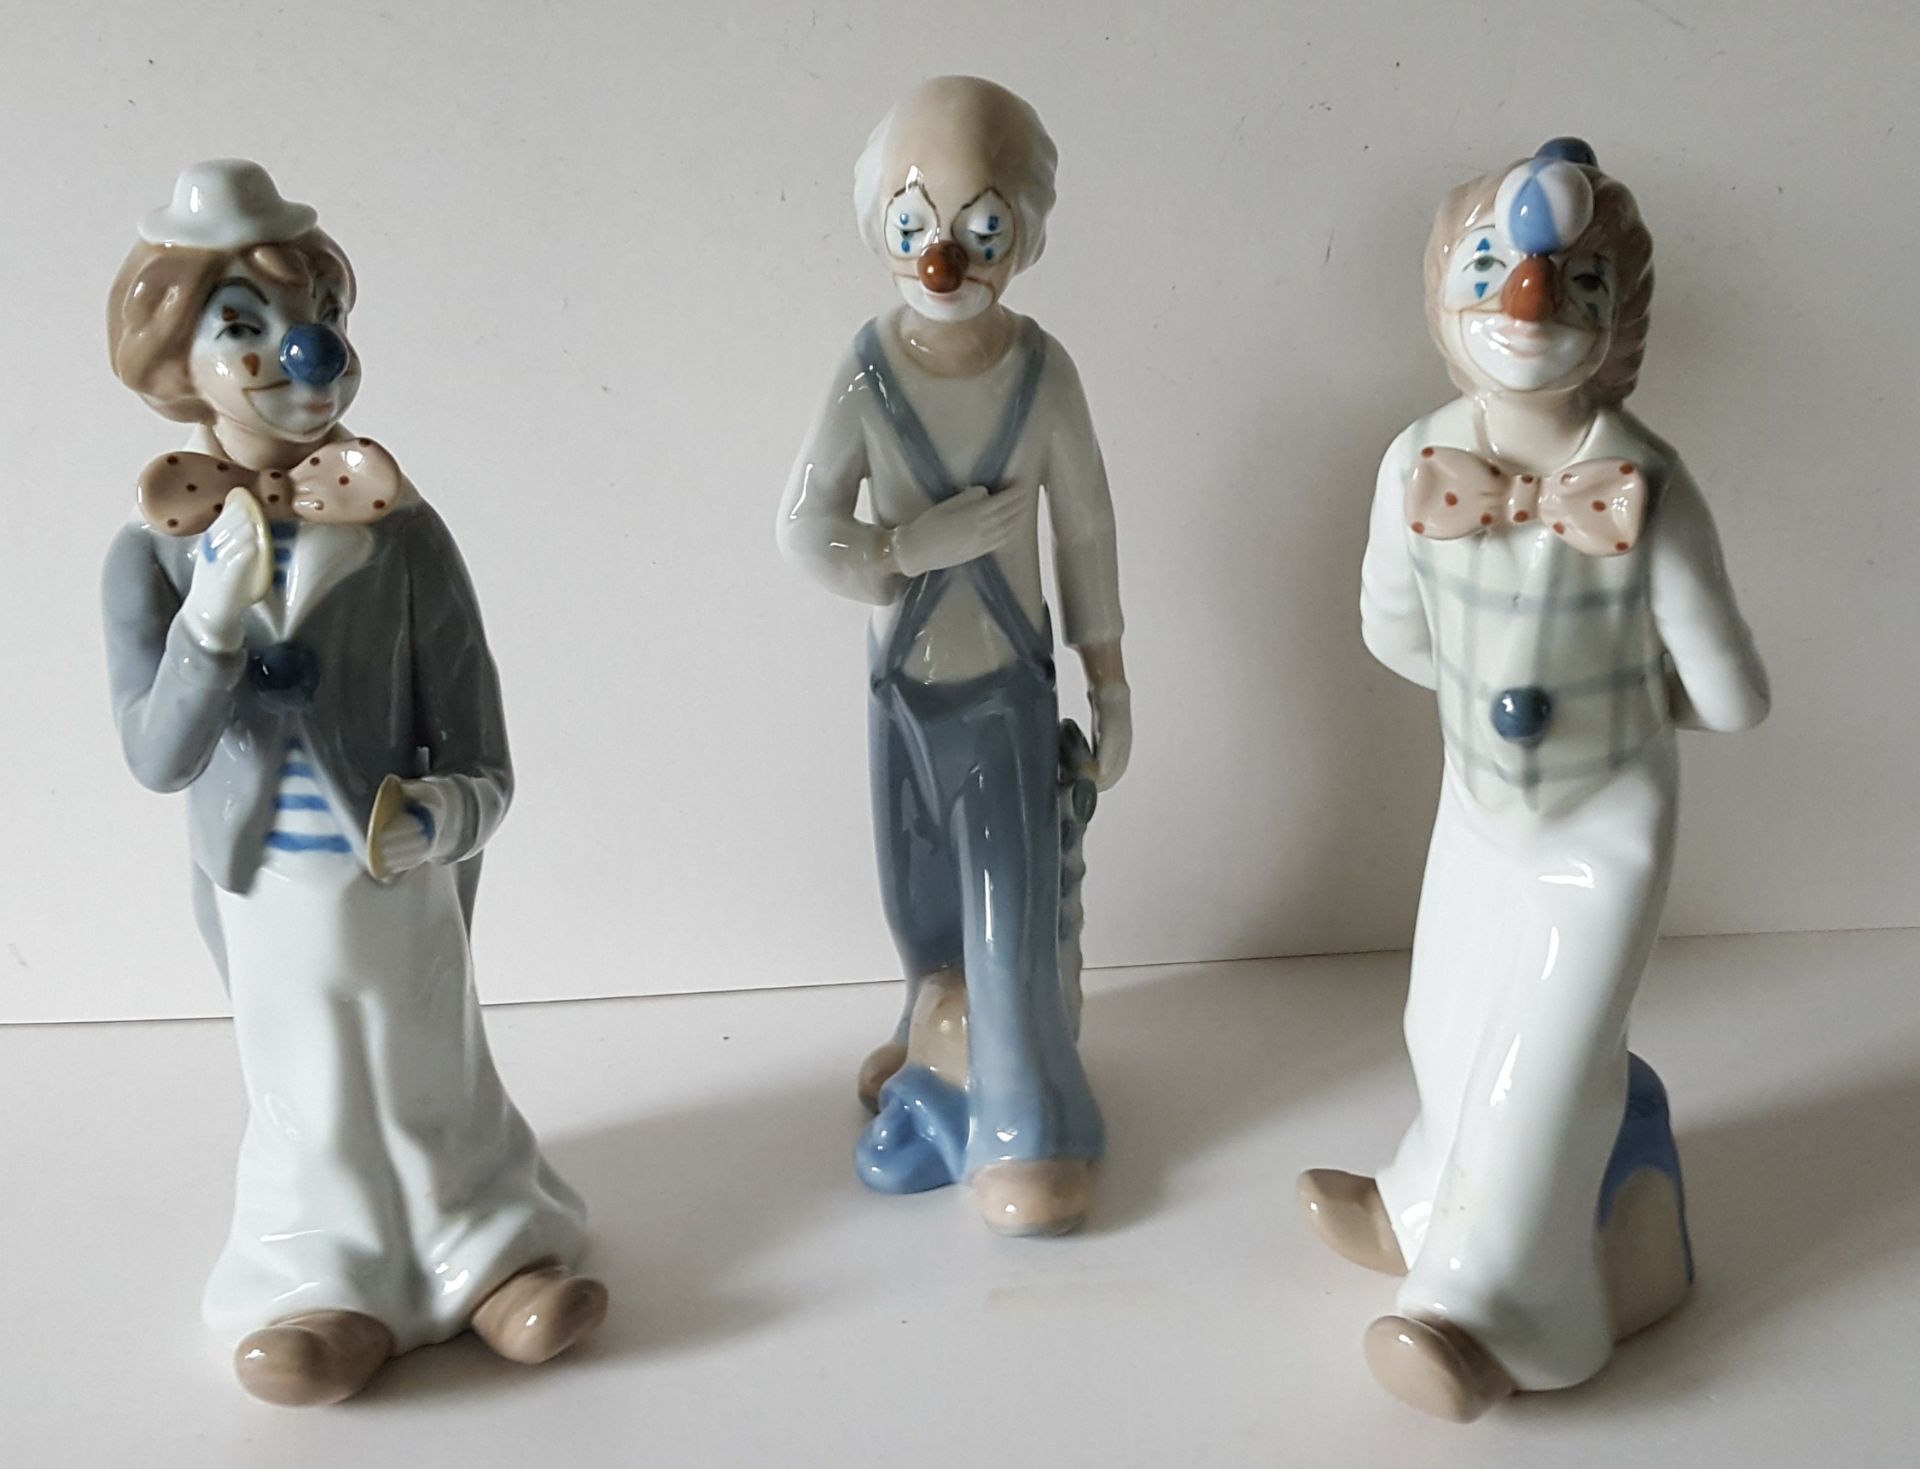 Collectable Casades Clown Figures 3 in Total